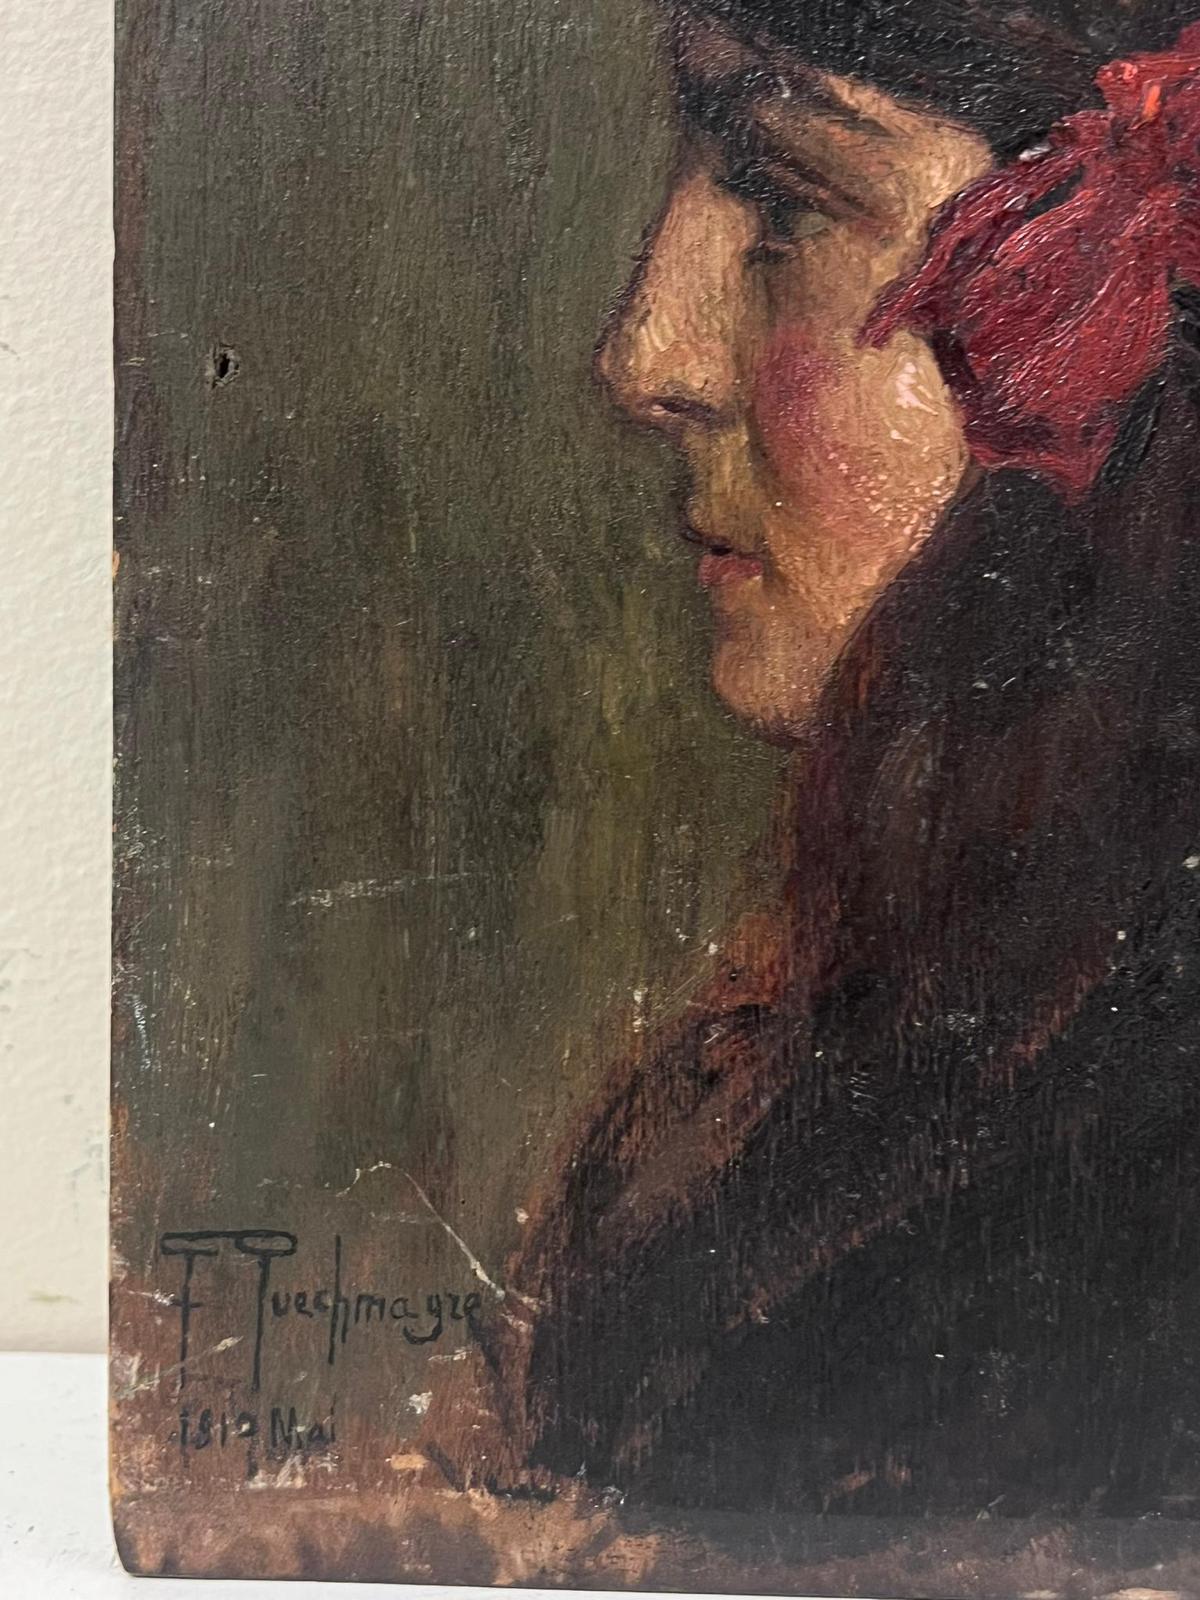 Portrait of a Young Lady
French Impressionist artist
signed oil on board, unframed
dated 1919
board: 9.5 x 6.5 inches
double sided work
provenance: private collection
condition: several surface scuffs and scratches but the work is basically sound. 